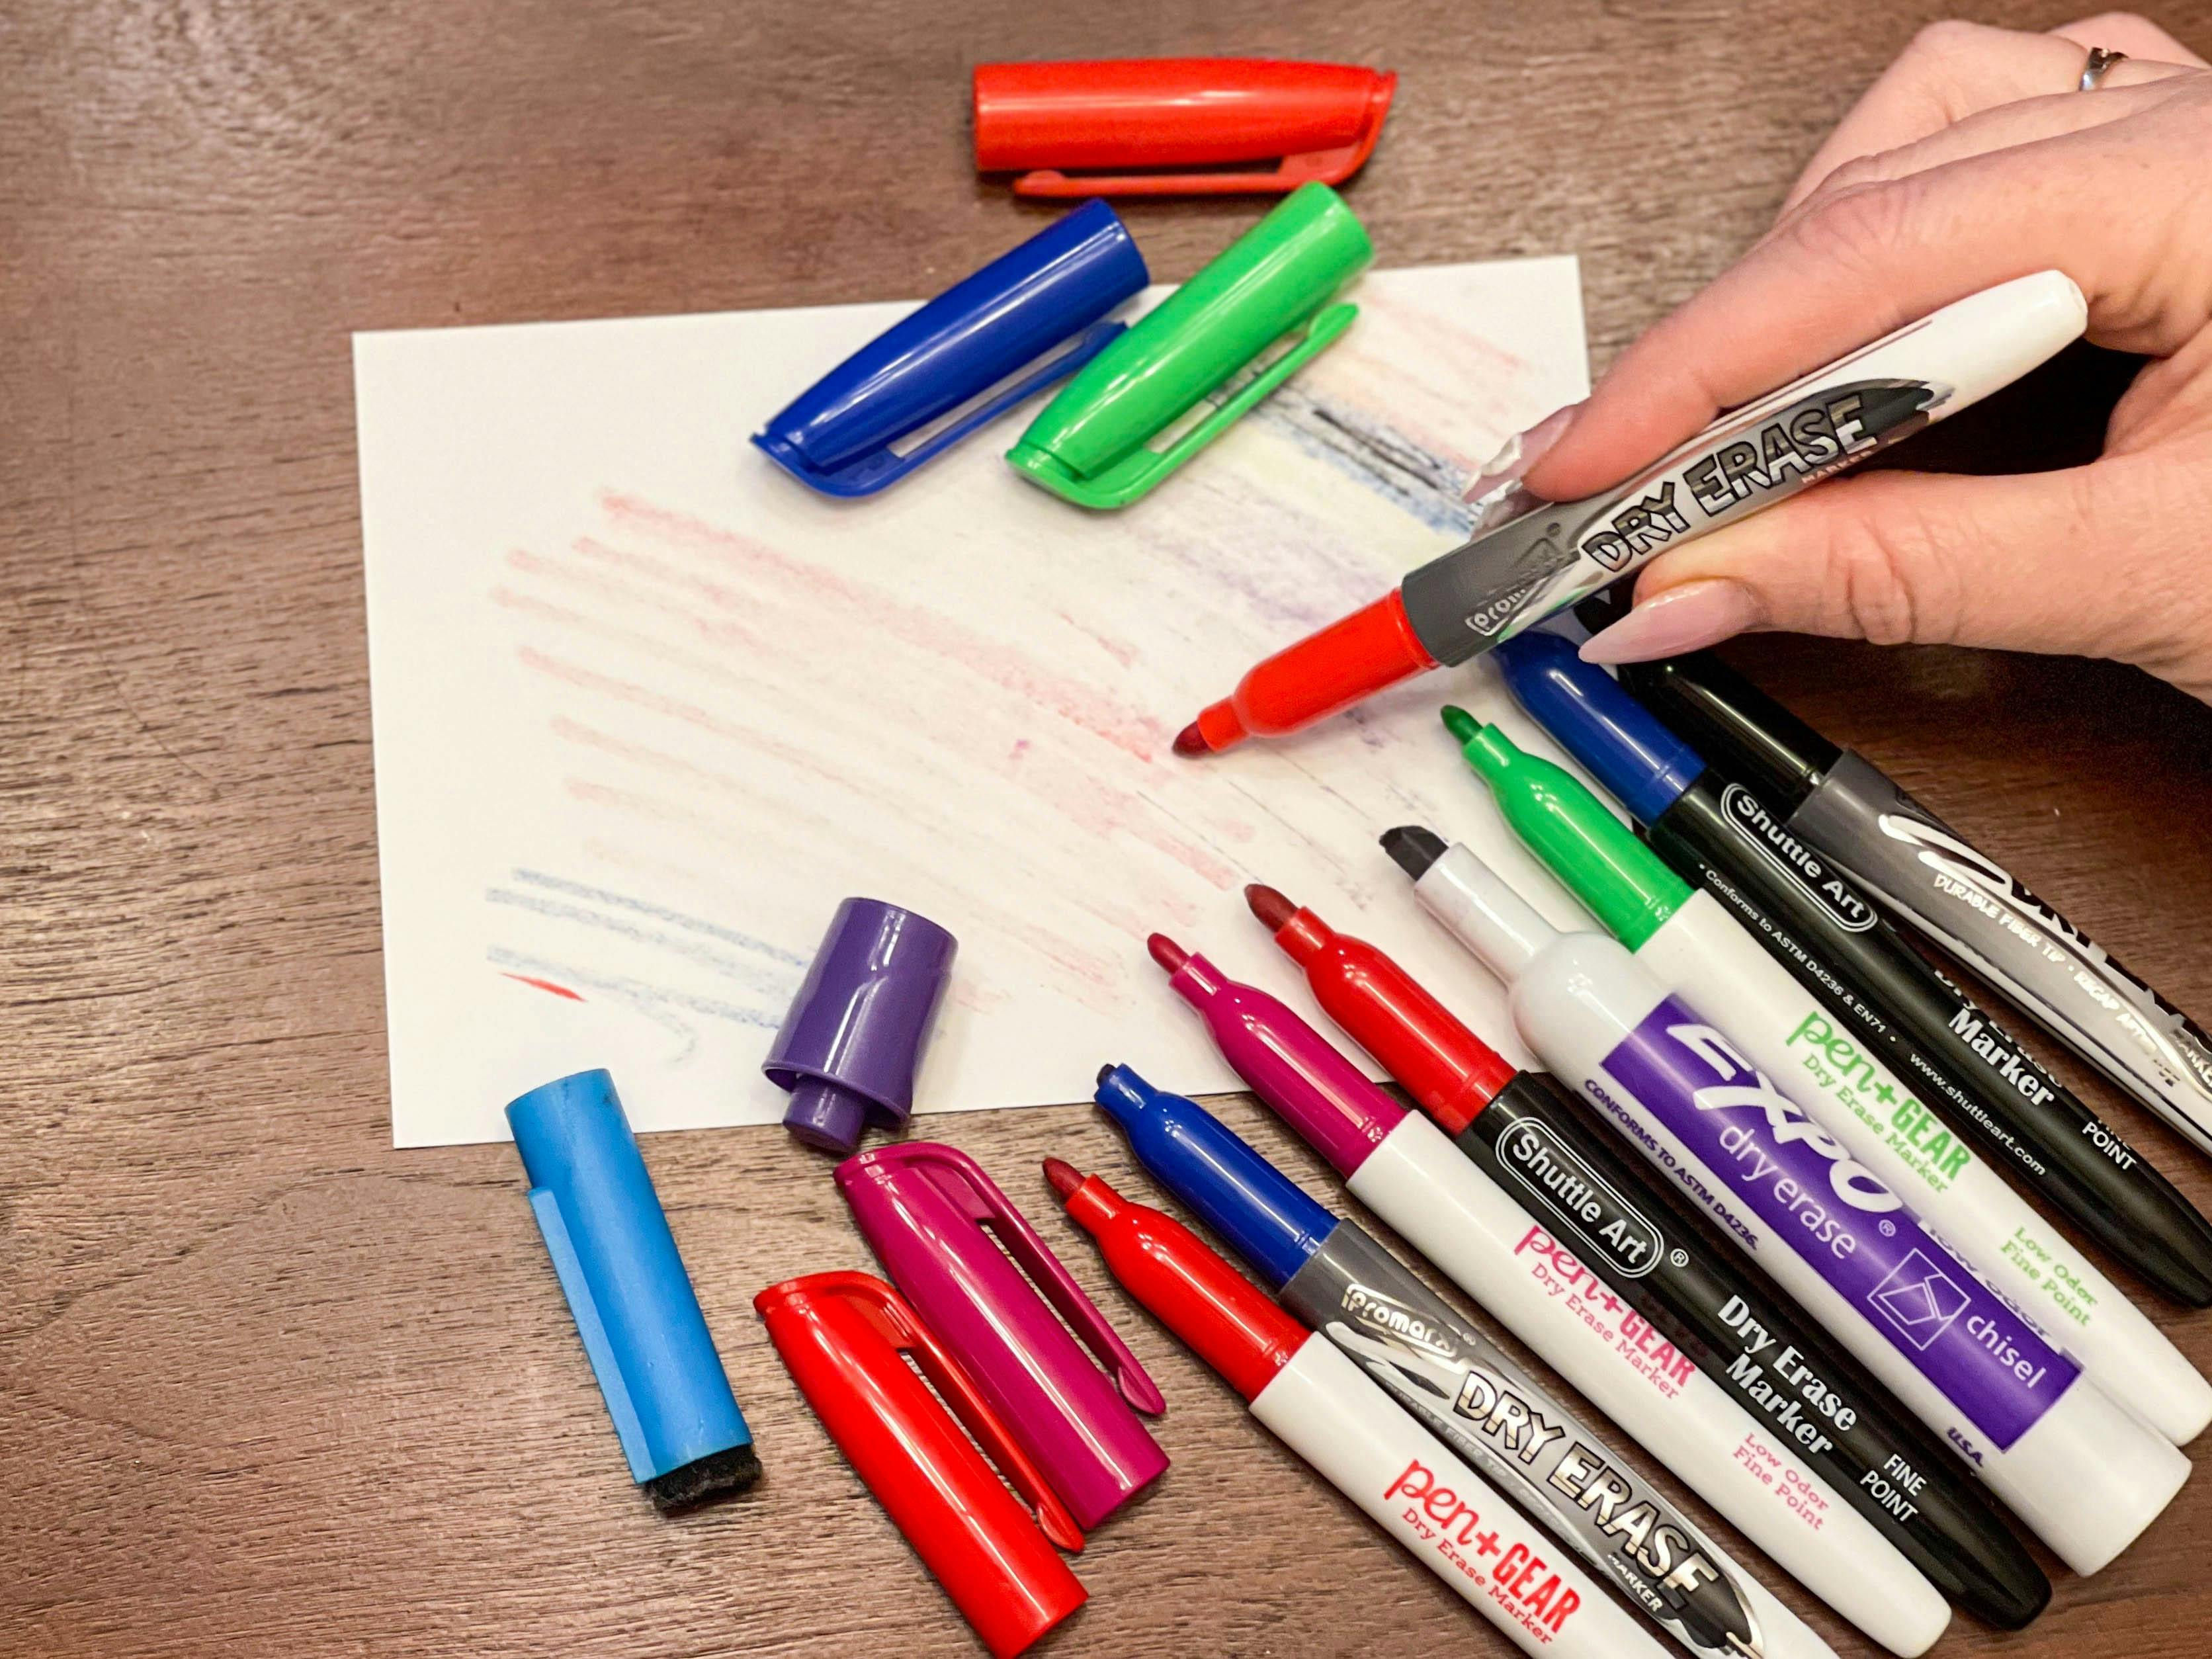 Volcanics Dry Erase Markers Low Odor Fine Whiteboard Markers